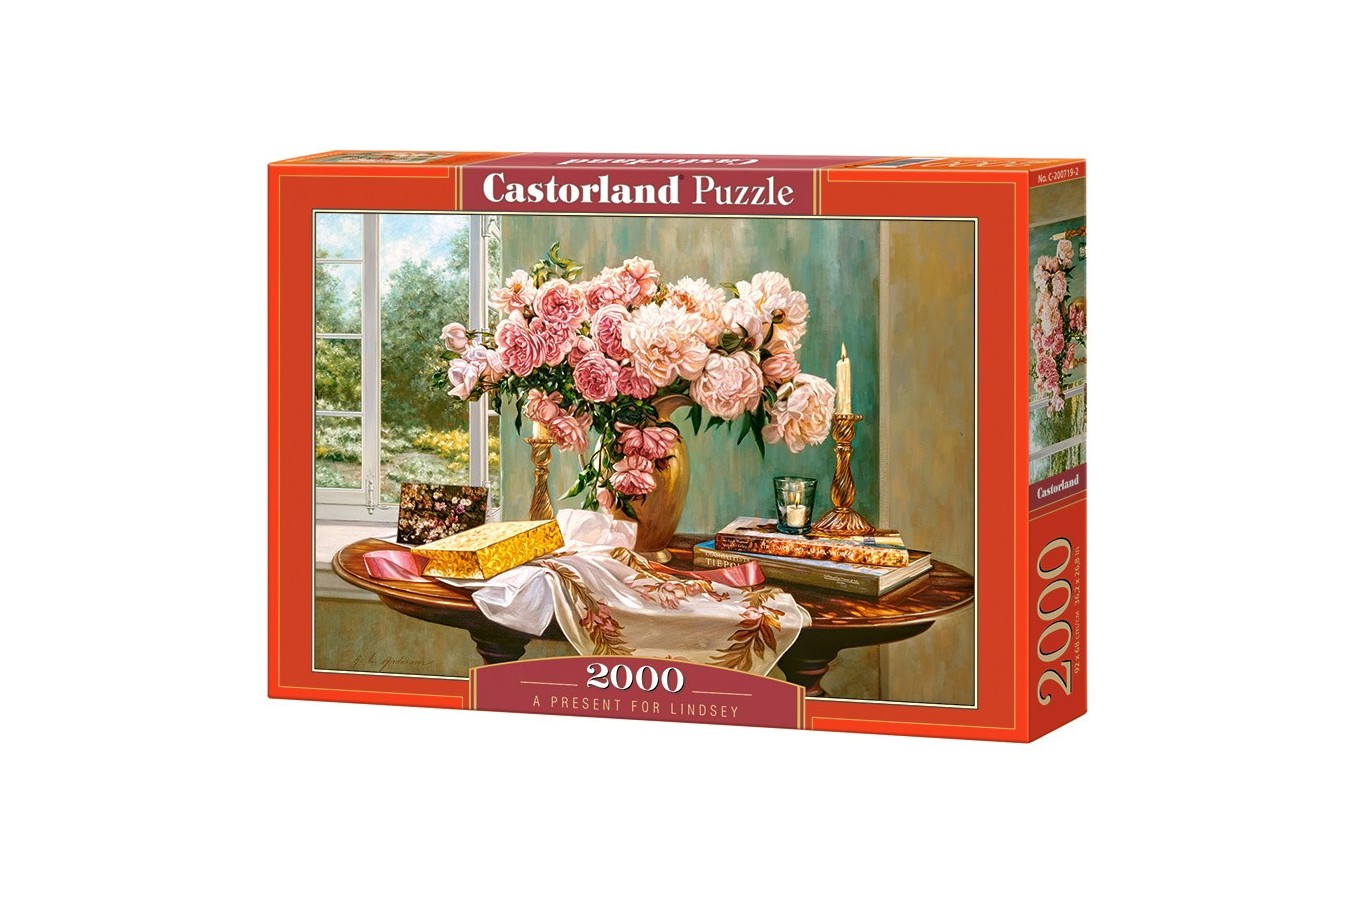 Puzzle Castorland - A Present For Lindsey, 2000 piese (200719)